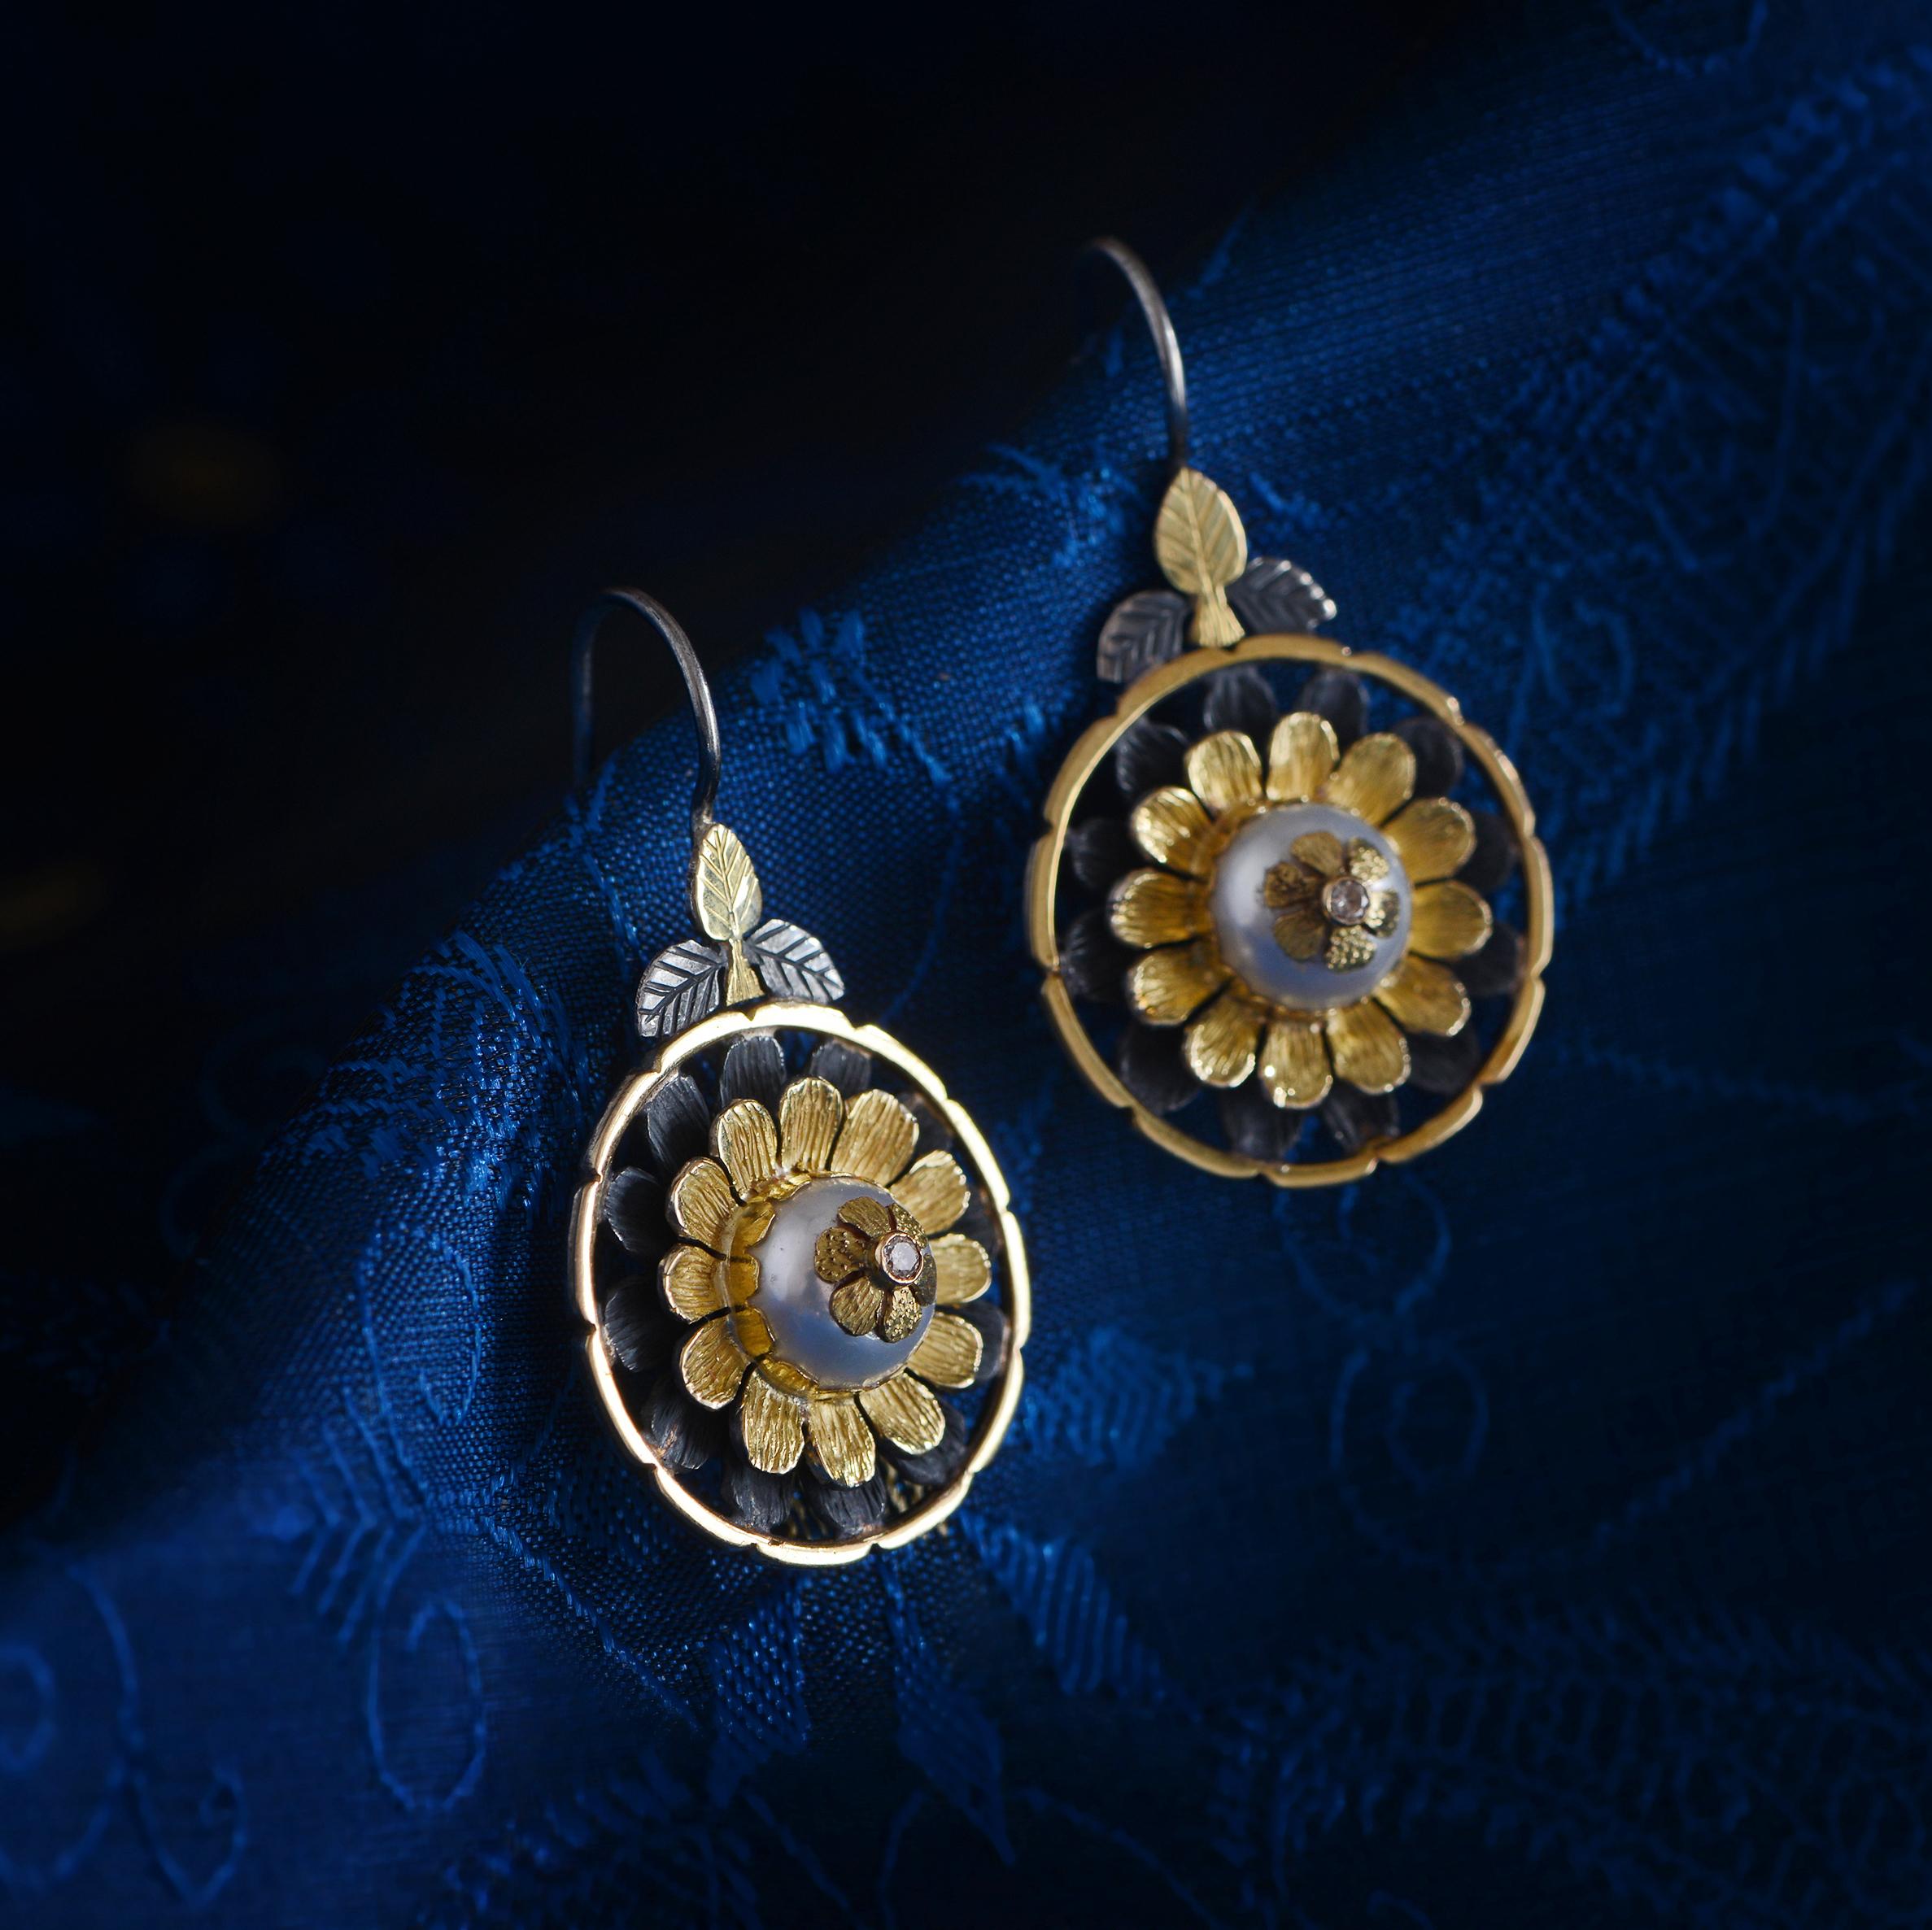 These exquisite one of a kind pearl diamond earrings have been handmade in our workshops.  We have used 18k gold hand engraved botanical motifs and overlaid them onto oxidized sterling silver. The central gemstones are pearls, which are embedded